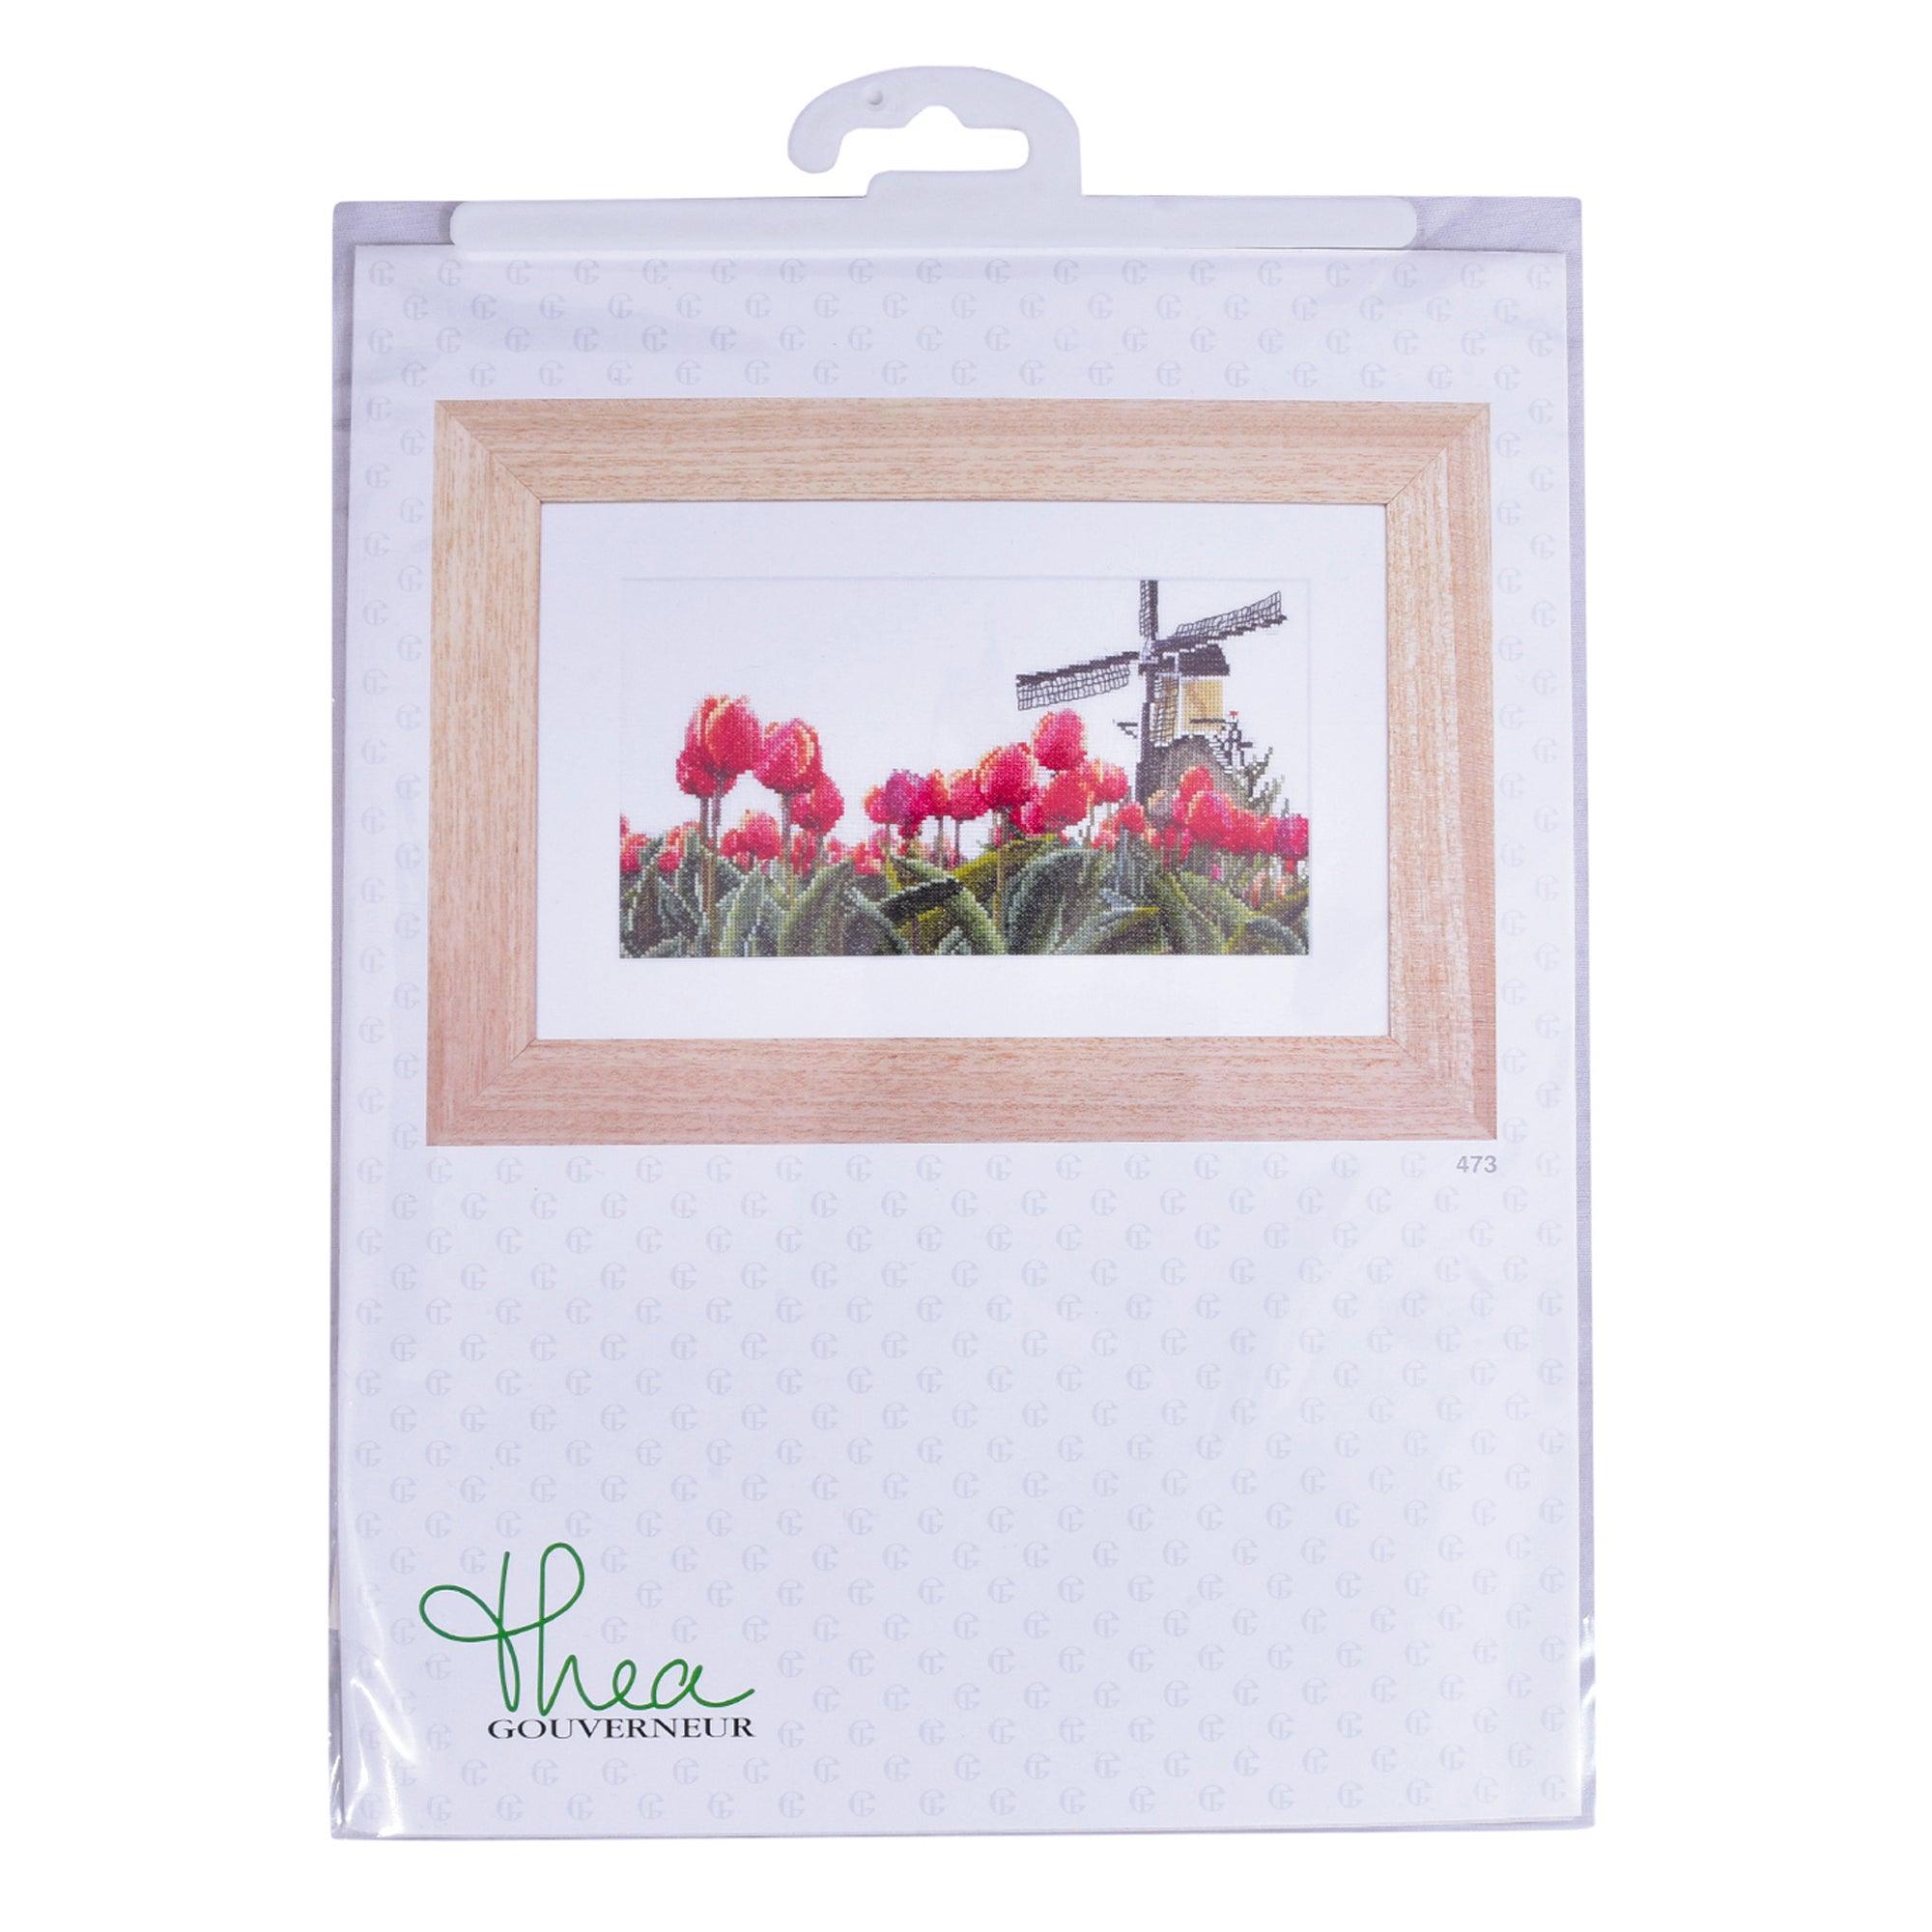 Thea Gouverneur - Counted Cross Stitch Kit - Bulbfield Tulips - Linen - 36 count - 473 - Thea Gouverneur Since 1959